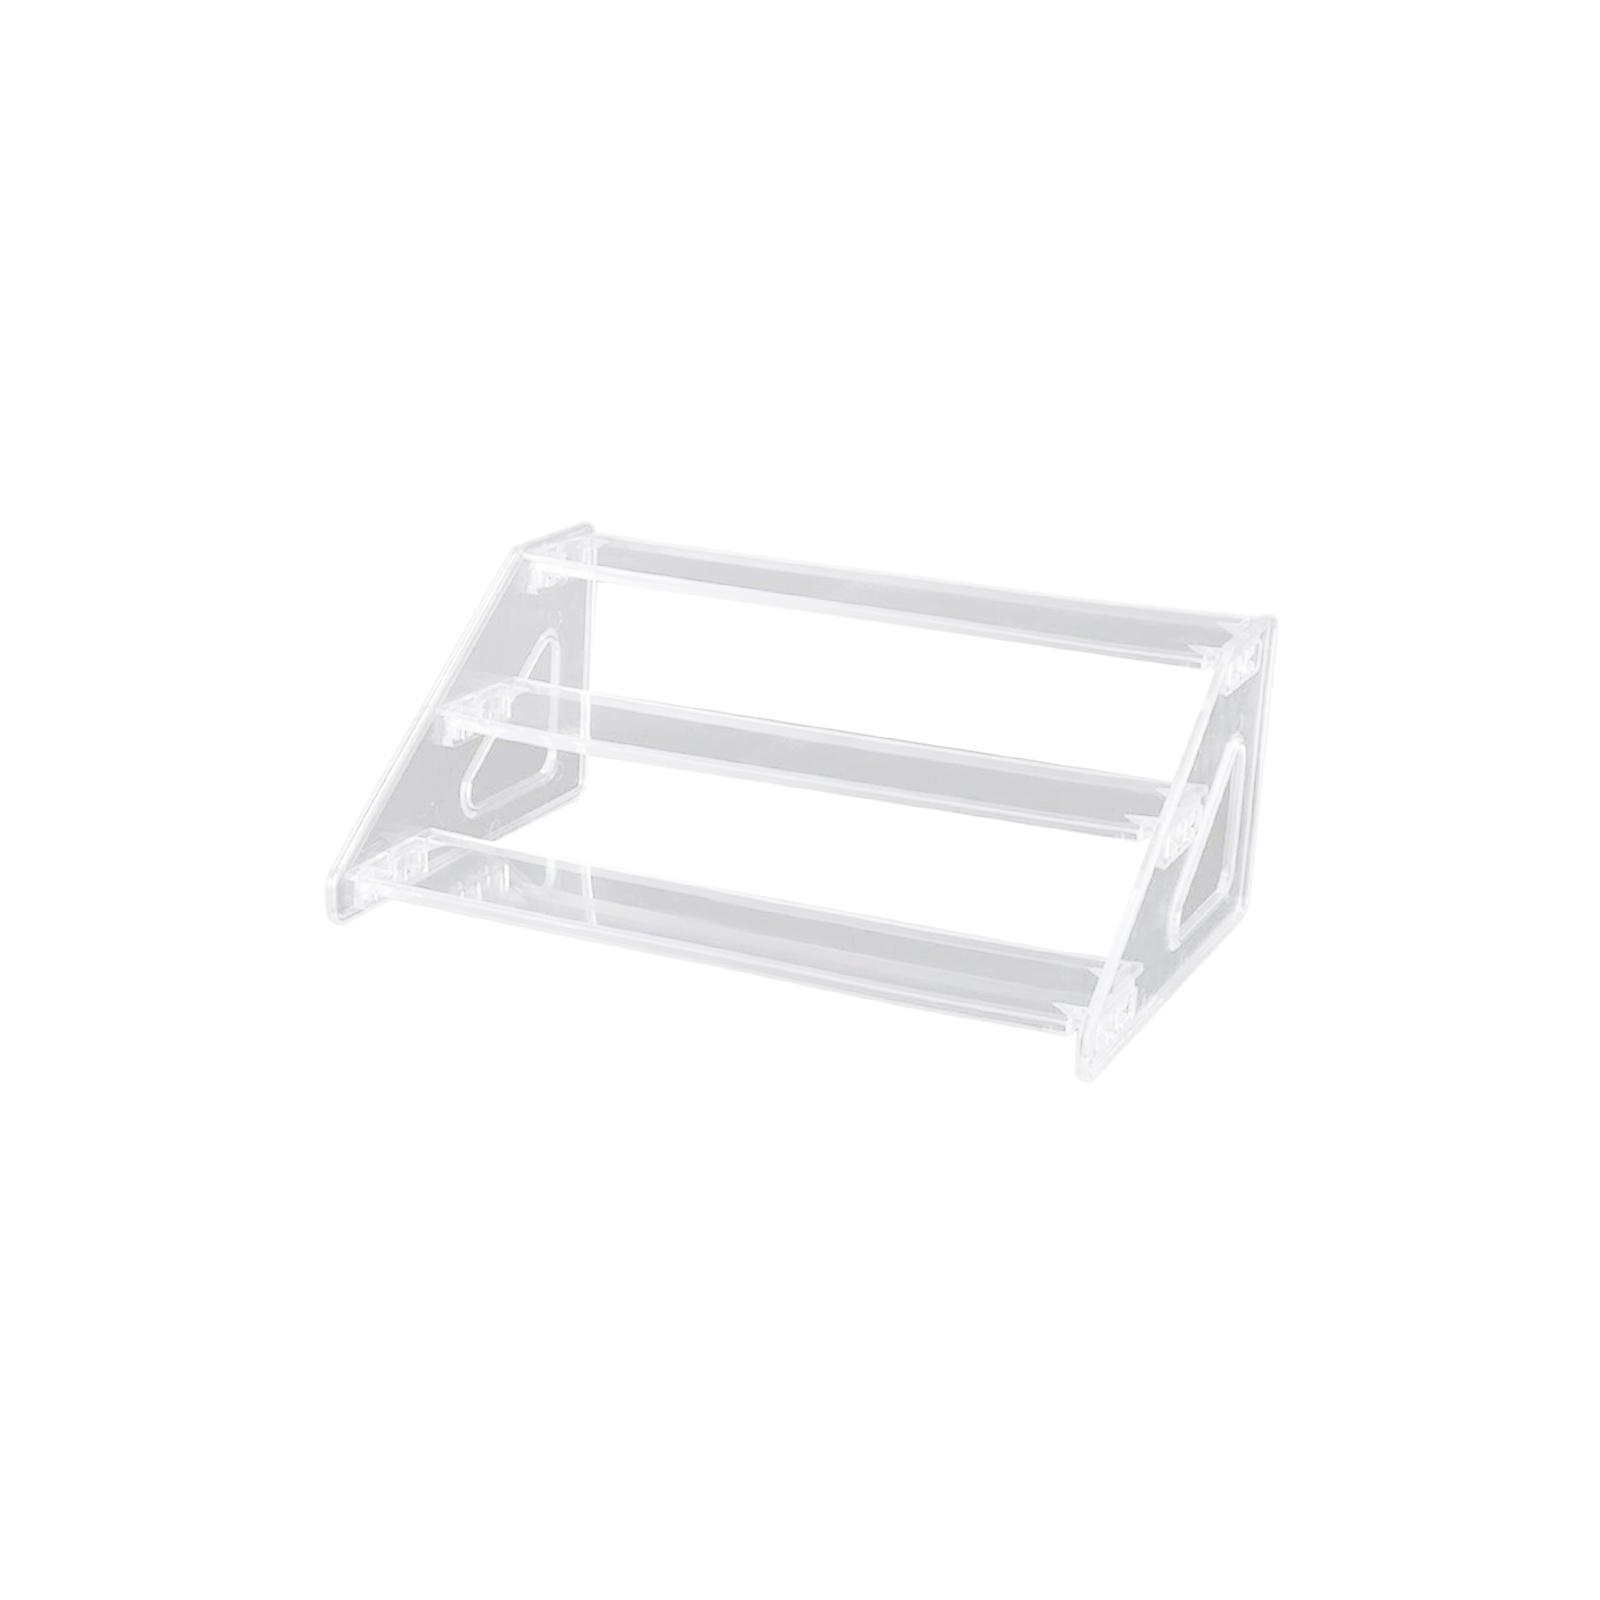 Acrylic Display Riser Multifunctional Storage Tabletop Acrylic Display Riser Jewelry Display Stand for Collectibles Action Figure Dolls Toys